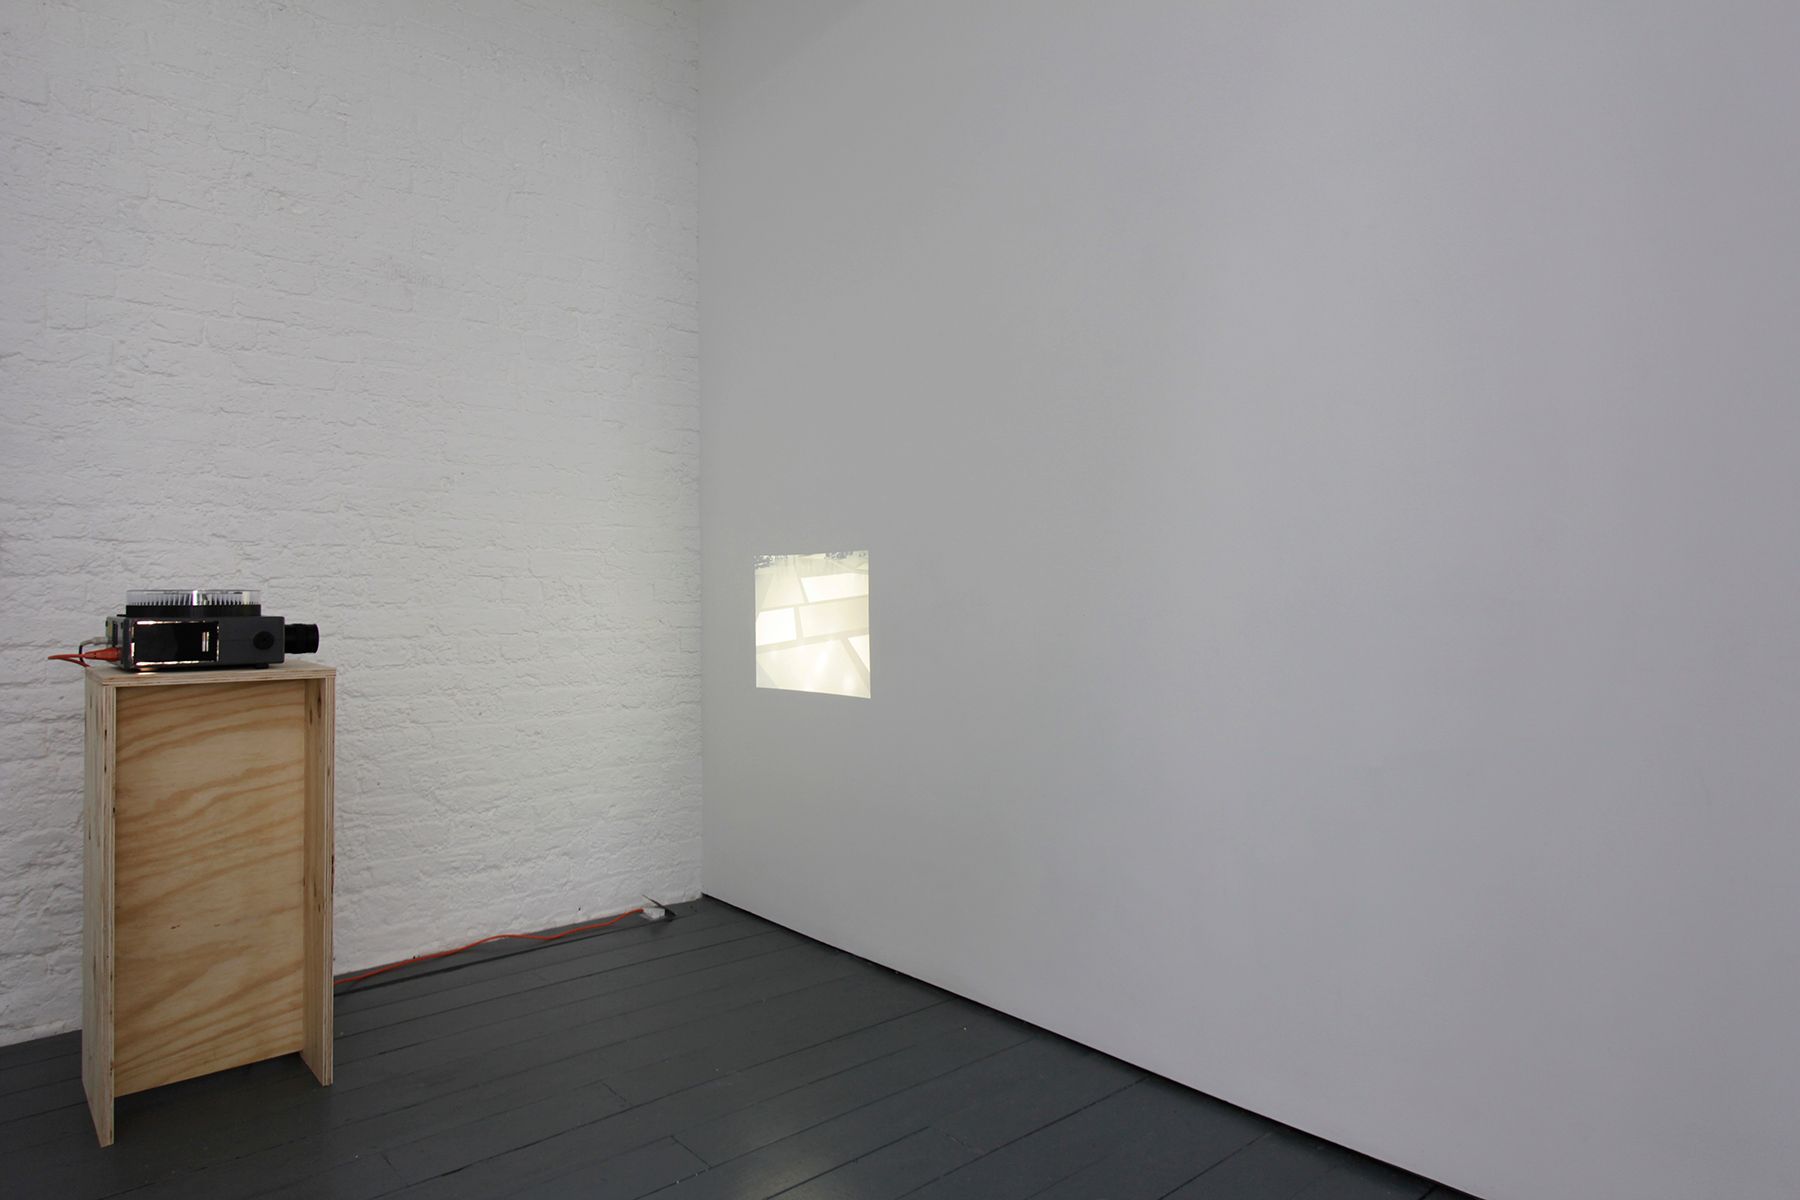 Grounds, 2003-2013 installation view